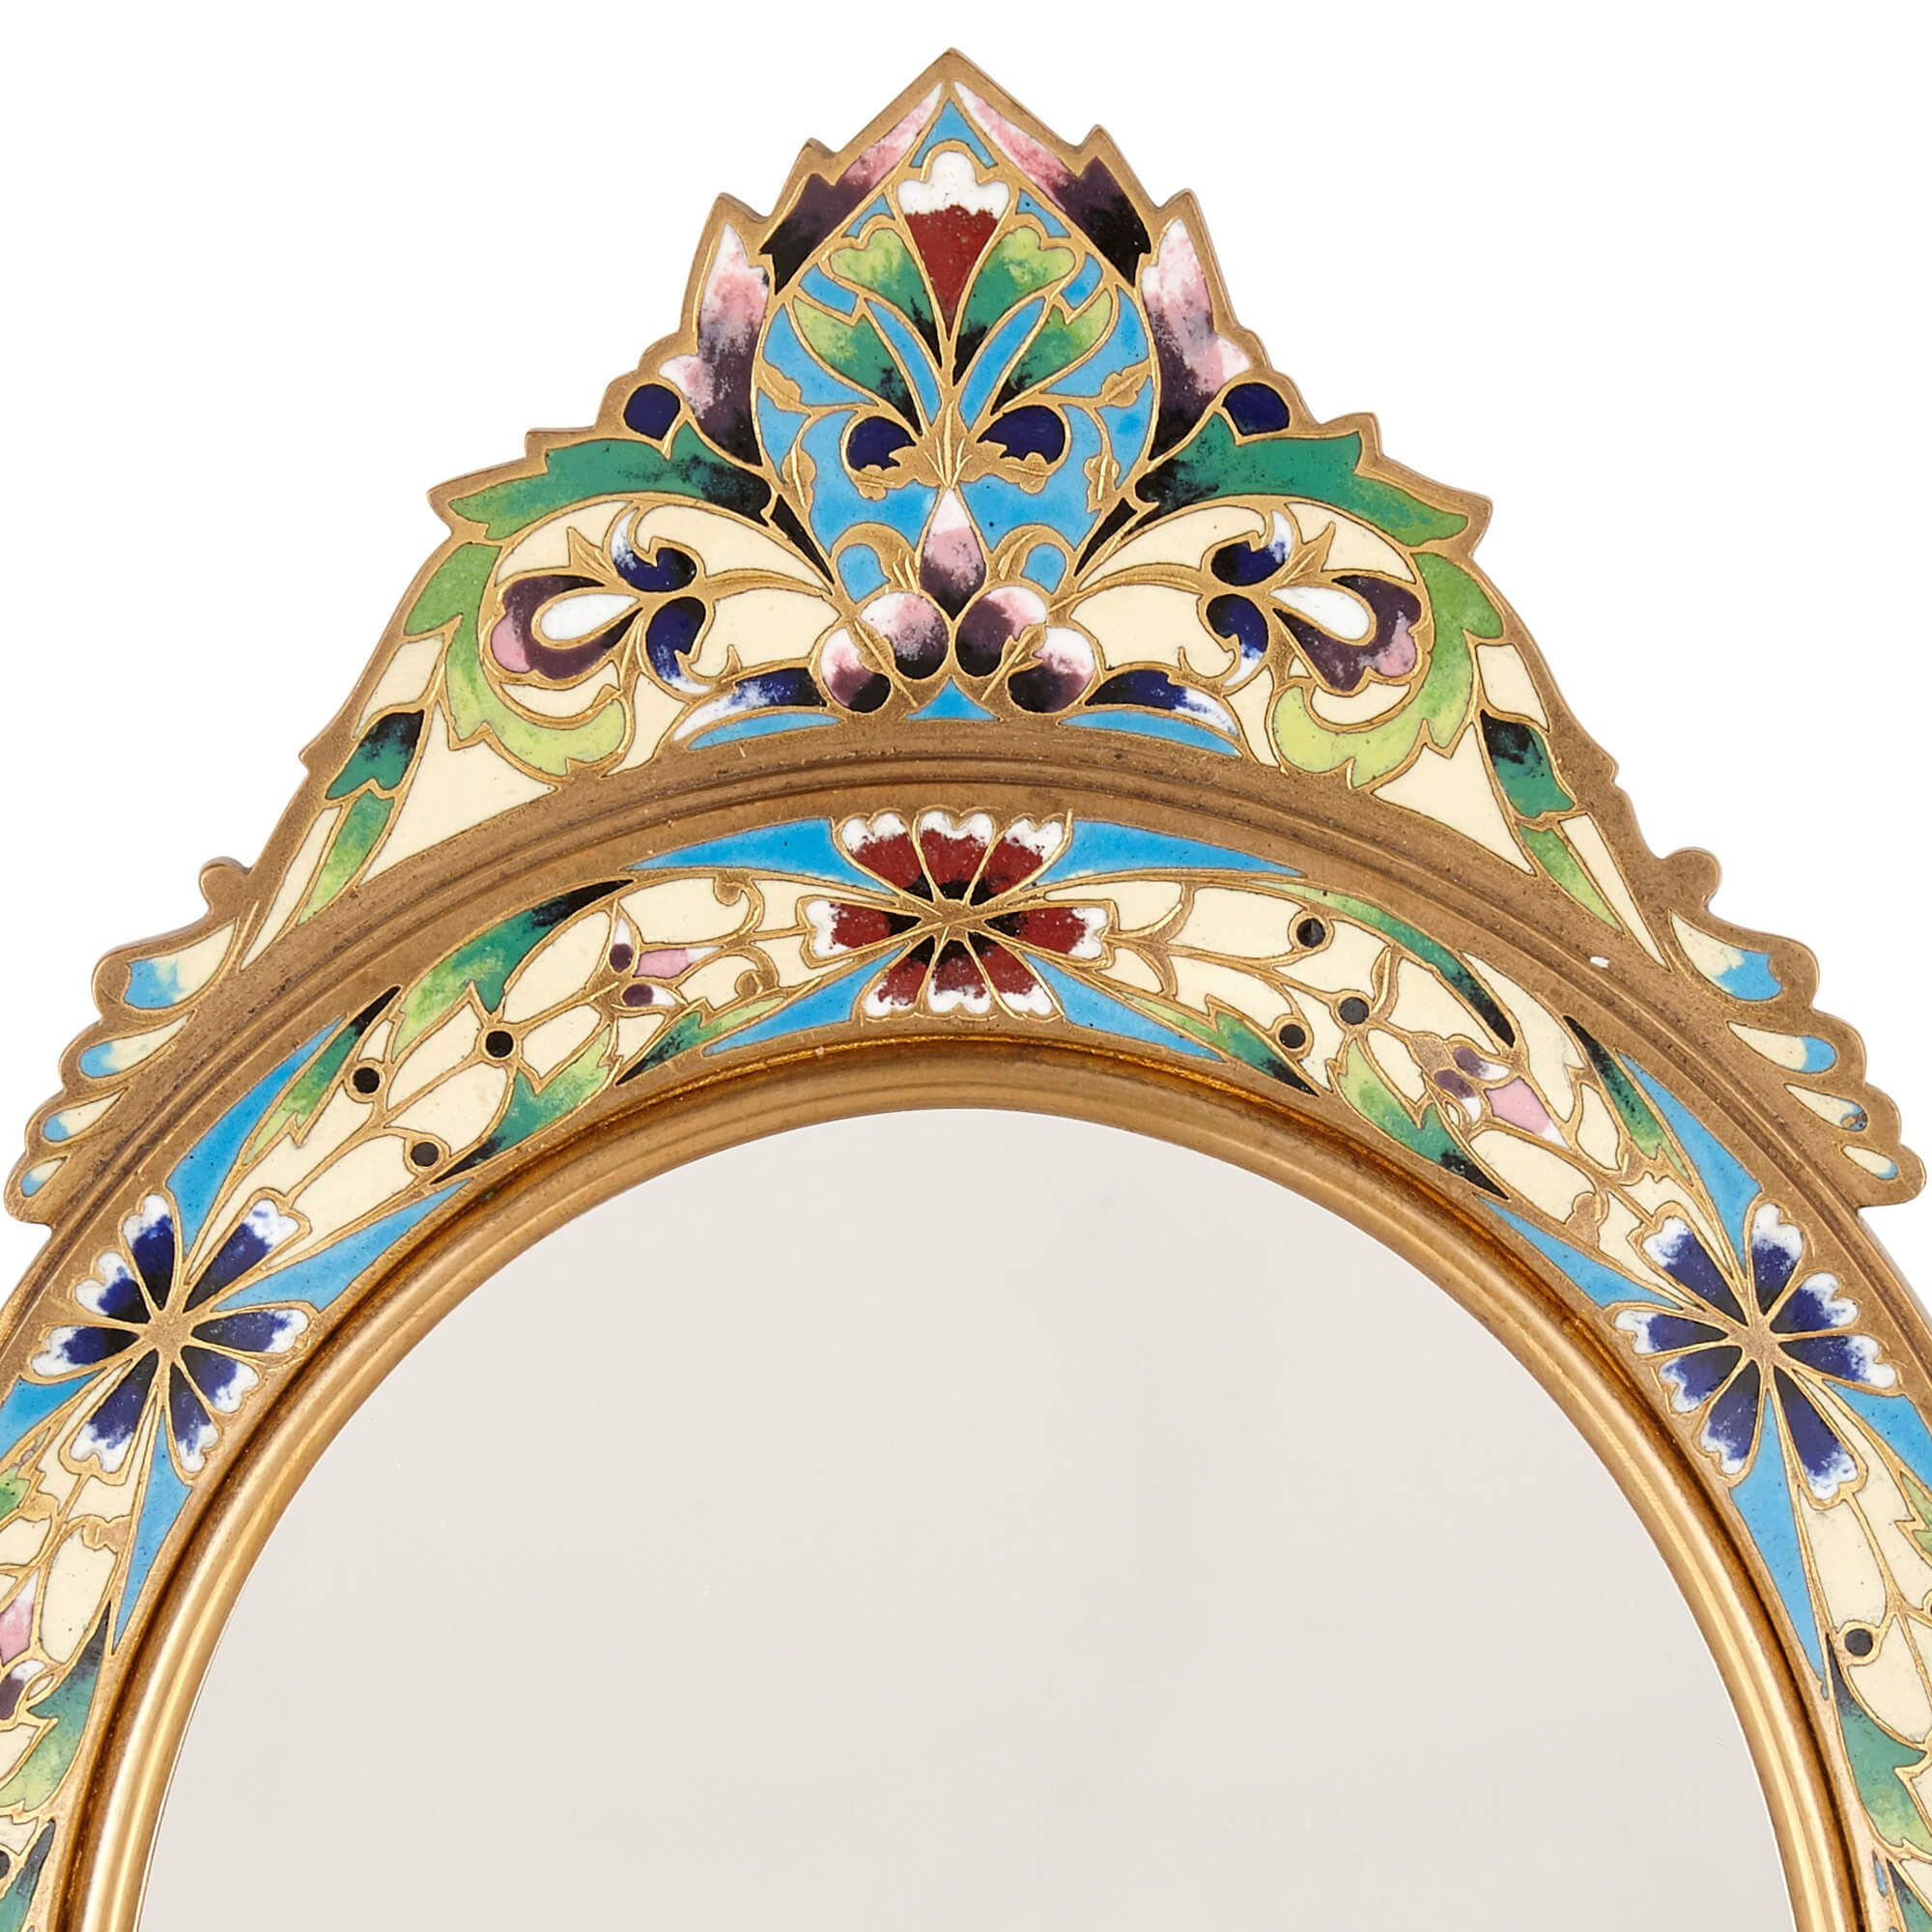 Cloisonné and gilt metal antique French toilette mirror | Mayfair Gallery